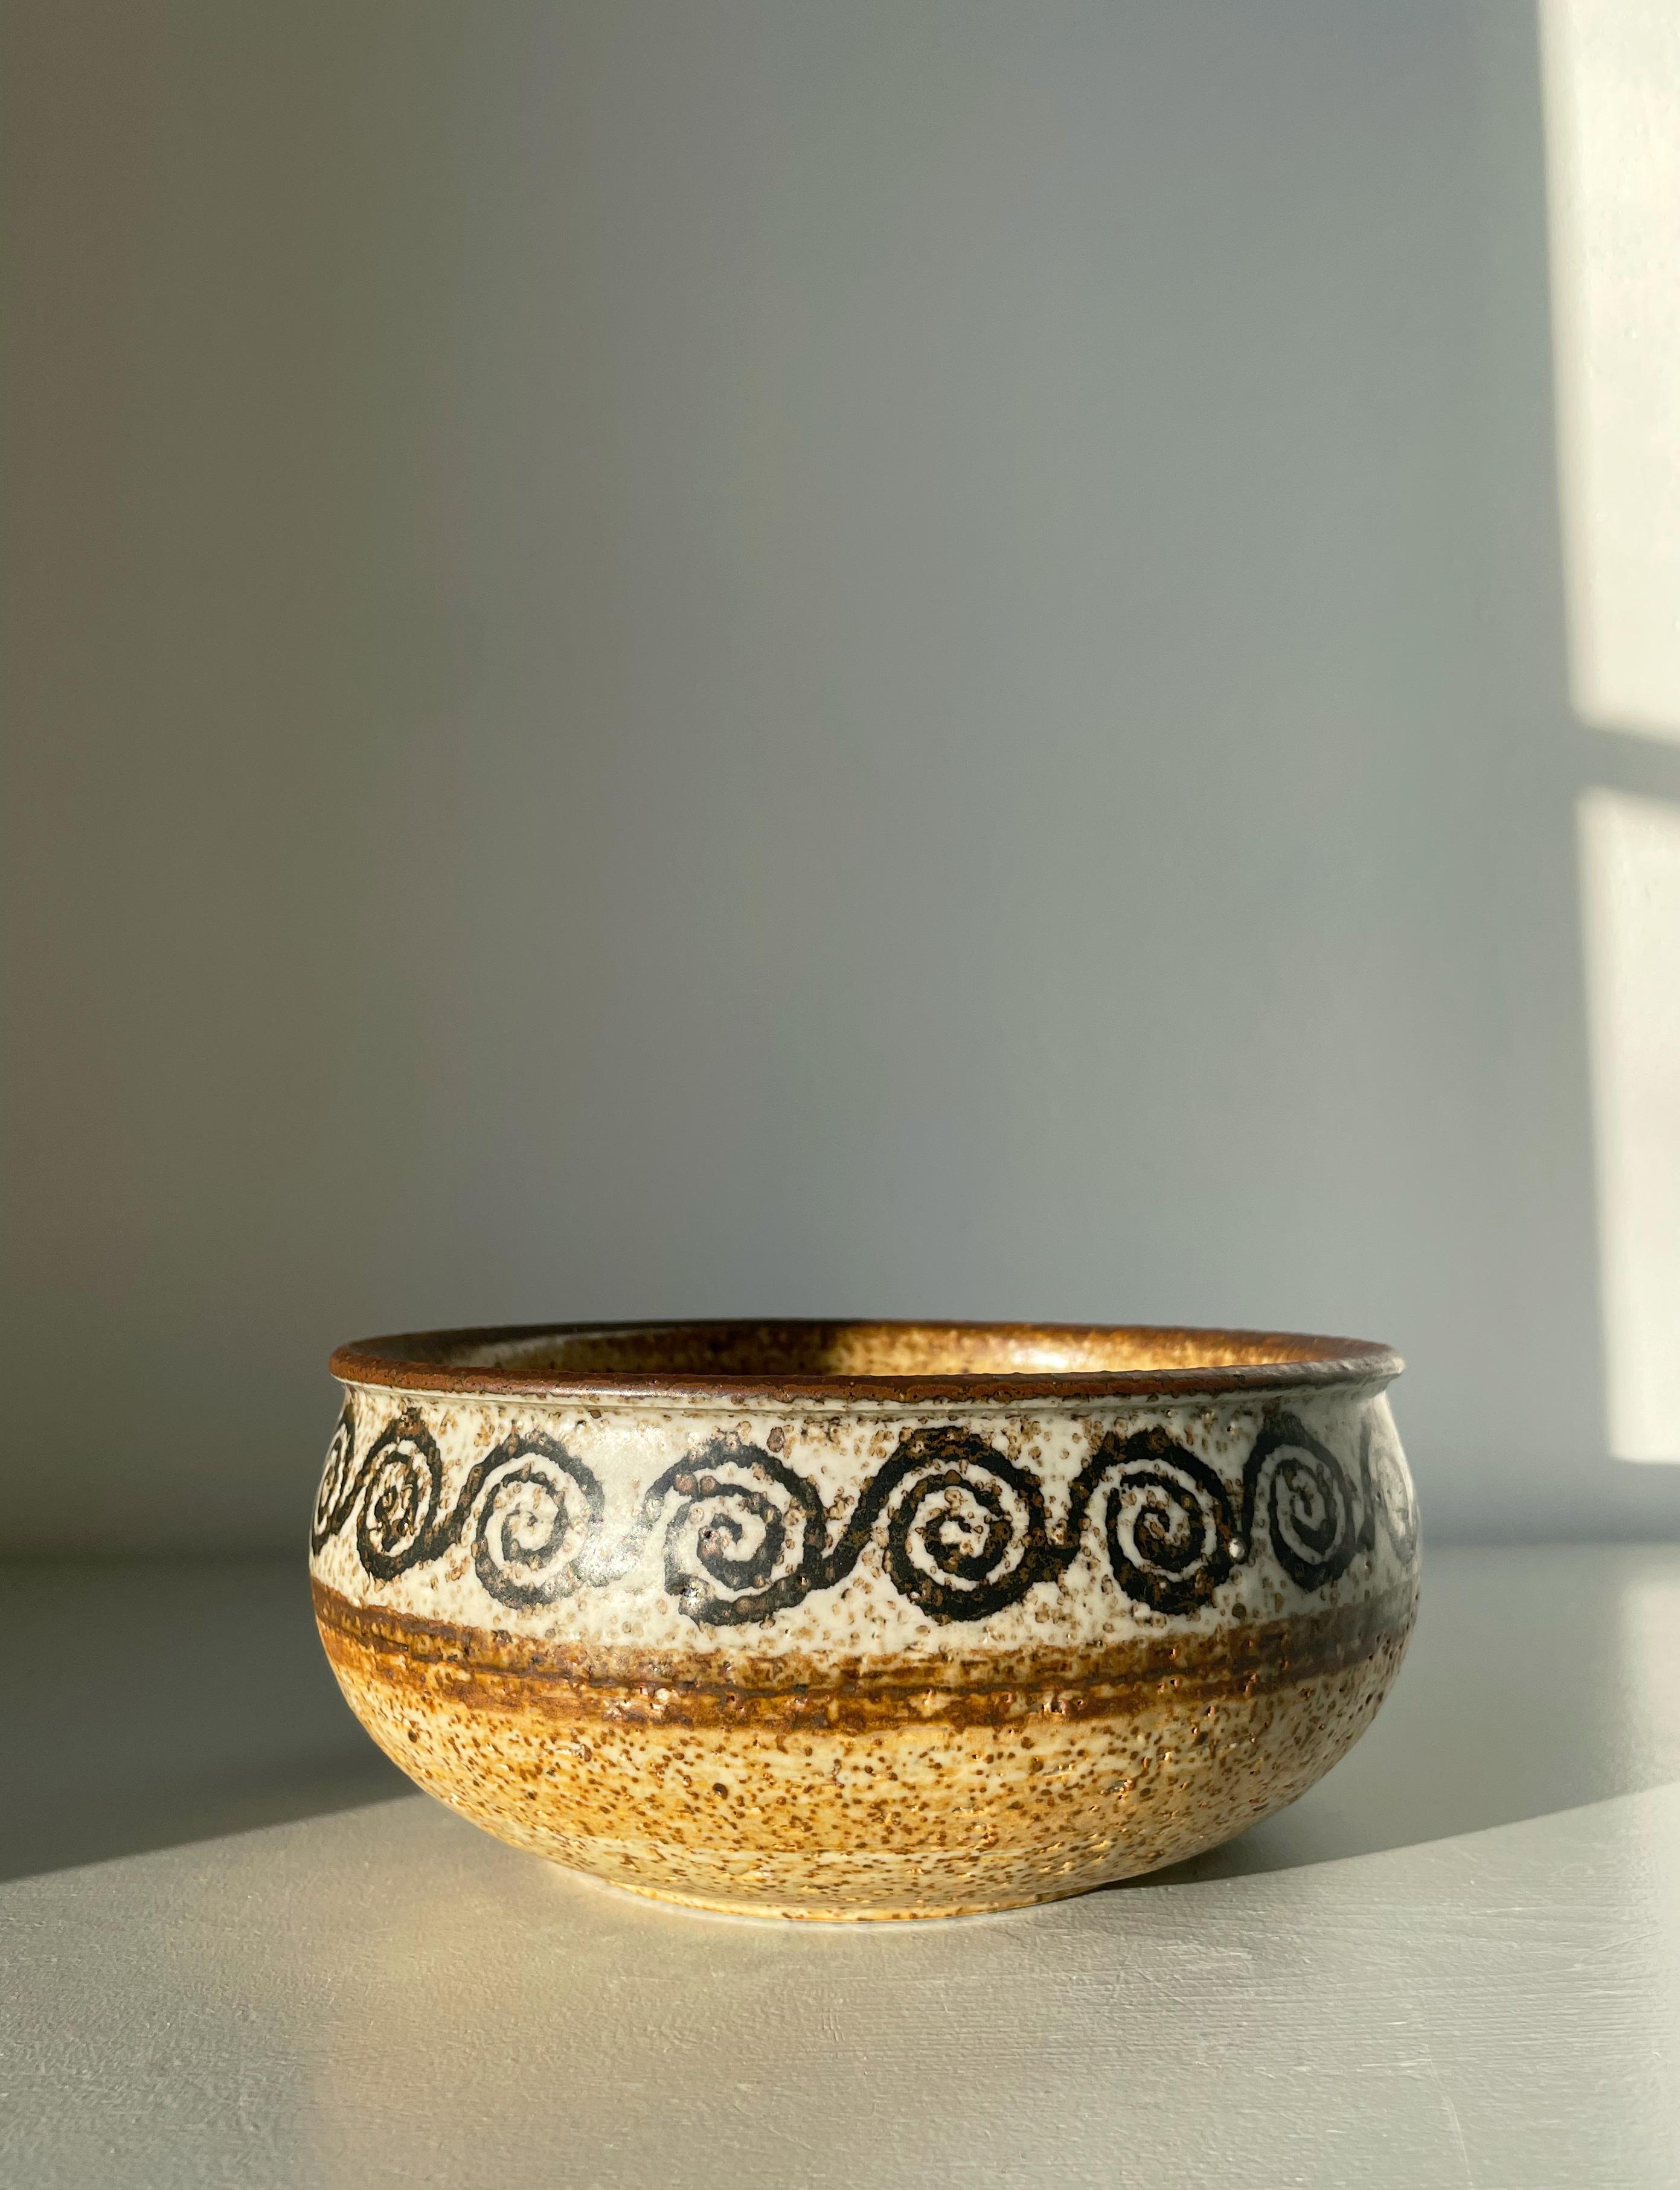 Vintage stoneware decorative bowl designed by the artist group Drejargruppen for Rörstrand in 1974. Glazed in sand, terracotta, parchment and brown colors with black hand painted circular decor around the top edge. Signed under base. Beautiful